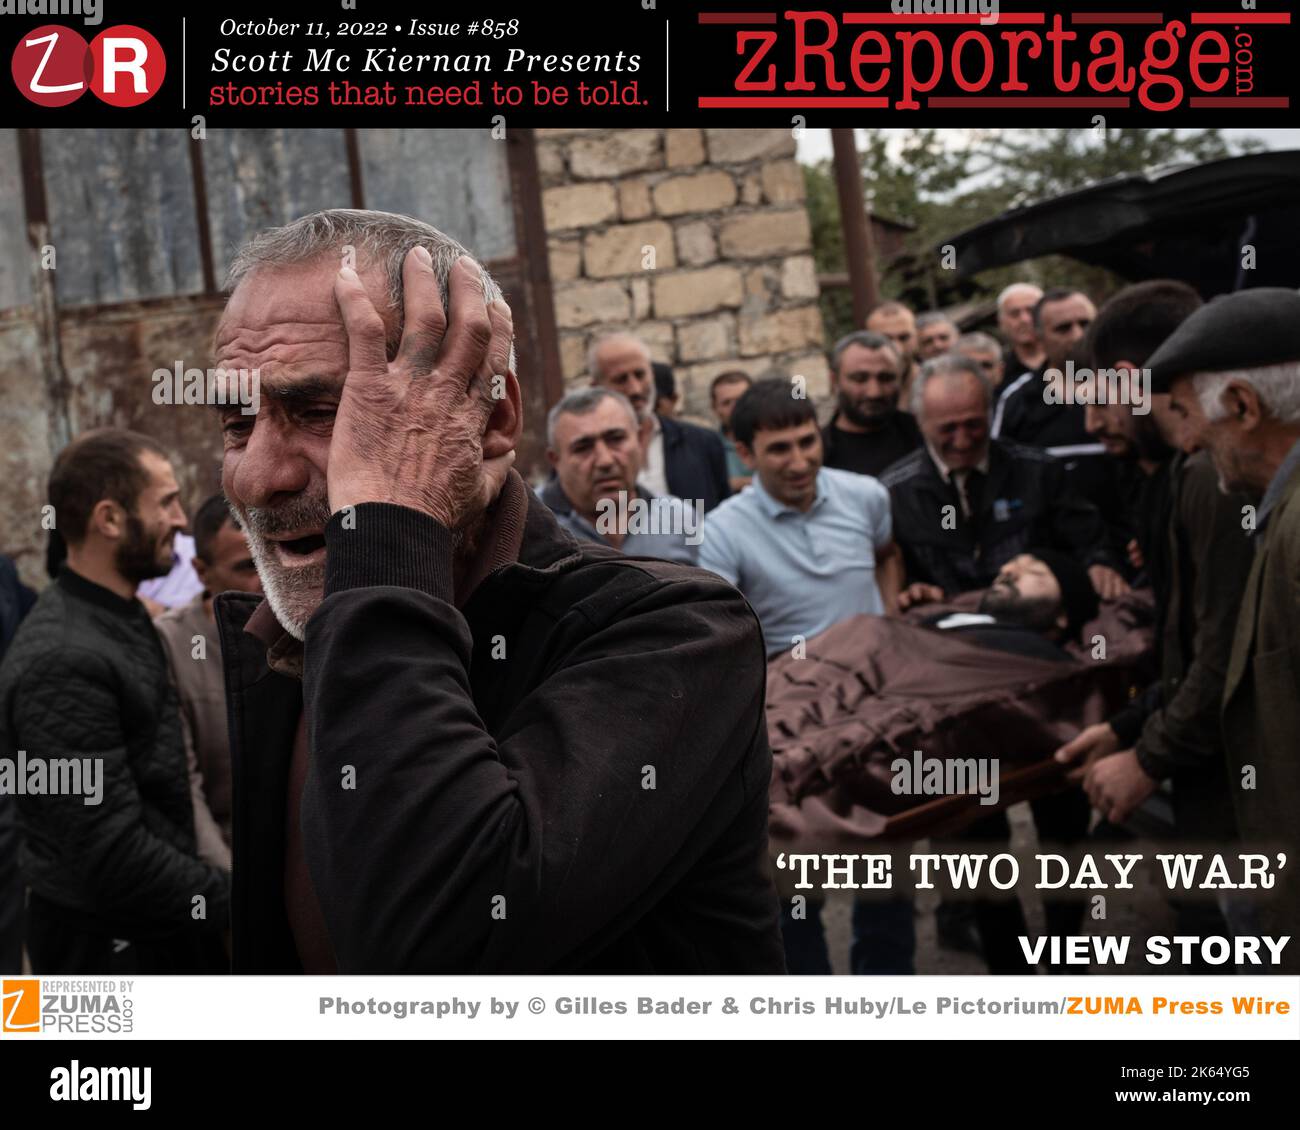 zReportage.com Story of the Week #858: TUESDAY October 11, 2022: 'THE TWO DAY WAR' by award winning Le Pictorium photographers Gilles Bader and Chris Huby: On September 13th, as families in eastern Armenia slept, Azerbaijan launched an unprovoked shelling on Armenian towns. The two former Soviet countries have been locked in off-and-on hostilities for decades over the disputed Nagorno-Karabakh republic, as Azerbaijan's regime takes advantage of the global, especially Russian, distraction. Azerbaijan attempted to deny a rocket attack, but NASA's fire management satellites detected massive therm Stock Photo